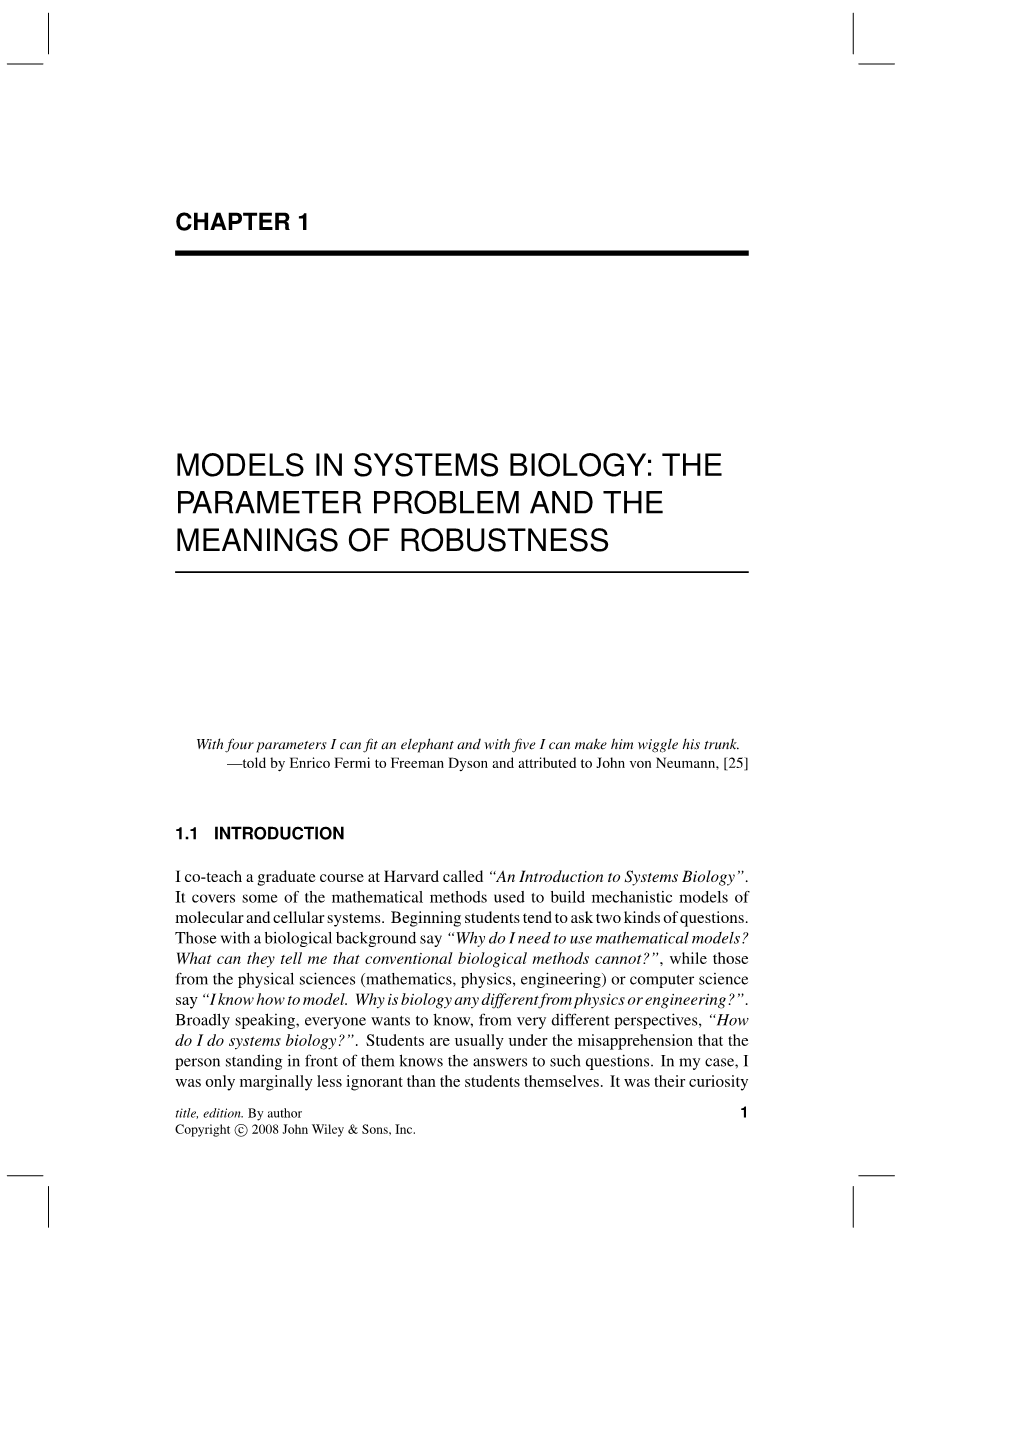 Models in Systems Biology: the Parameter Problem and the Meanings of Robustness